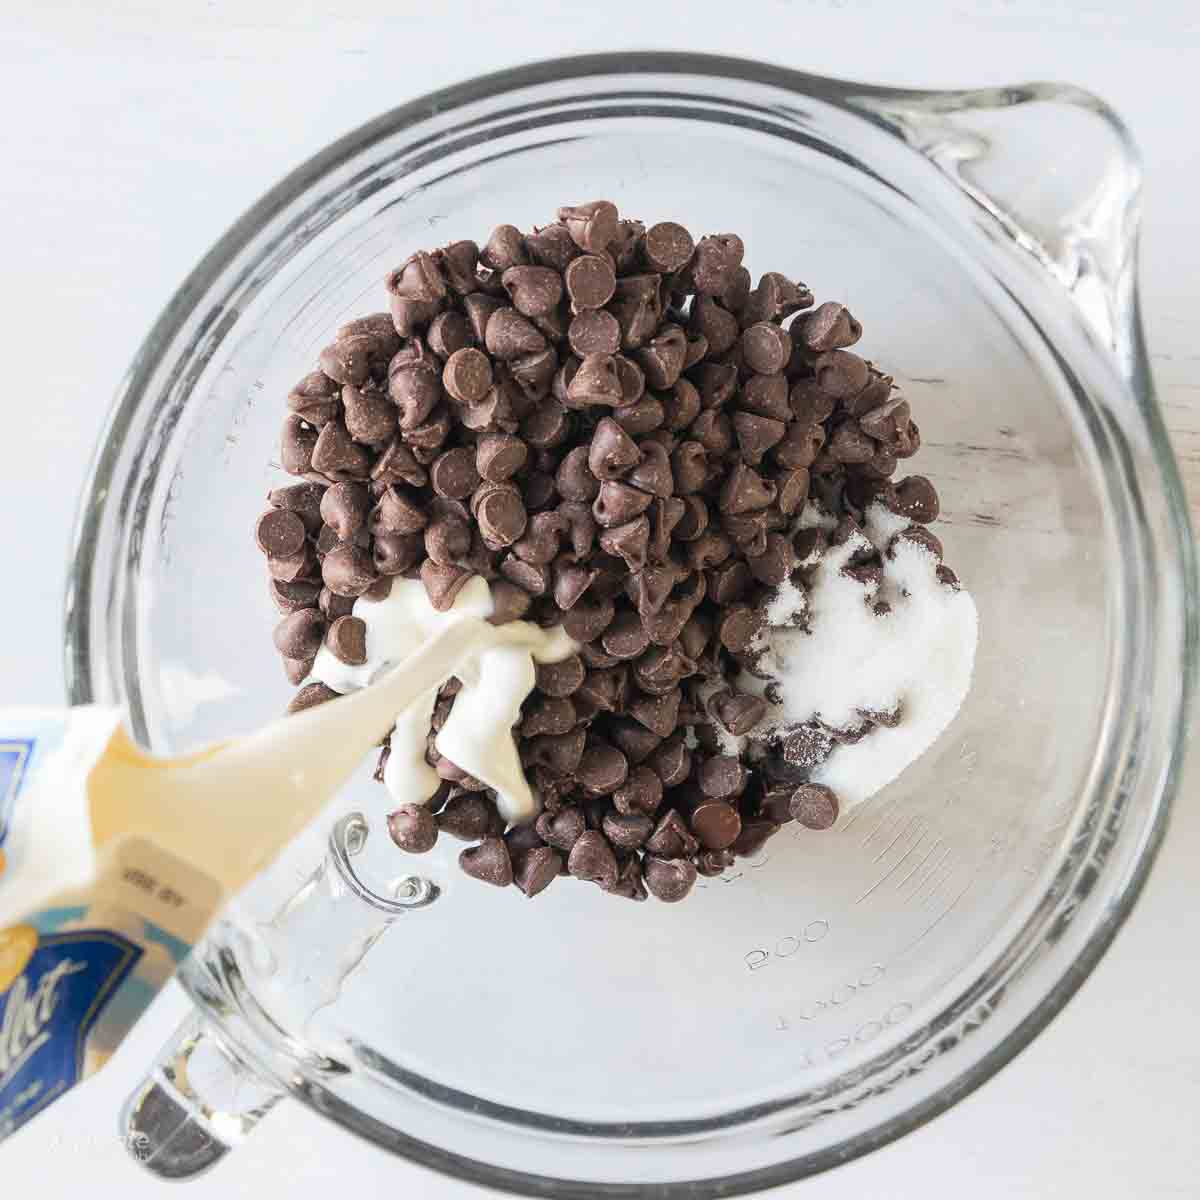 Chocolate chips in a glass bowl with sugar and whipping cream being poured in.